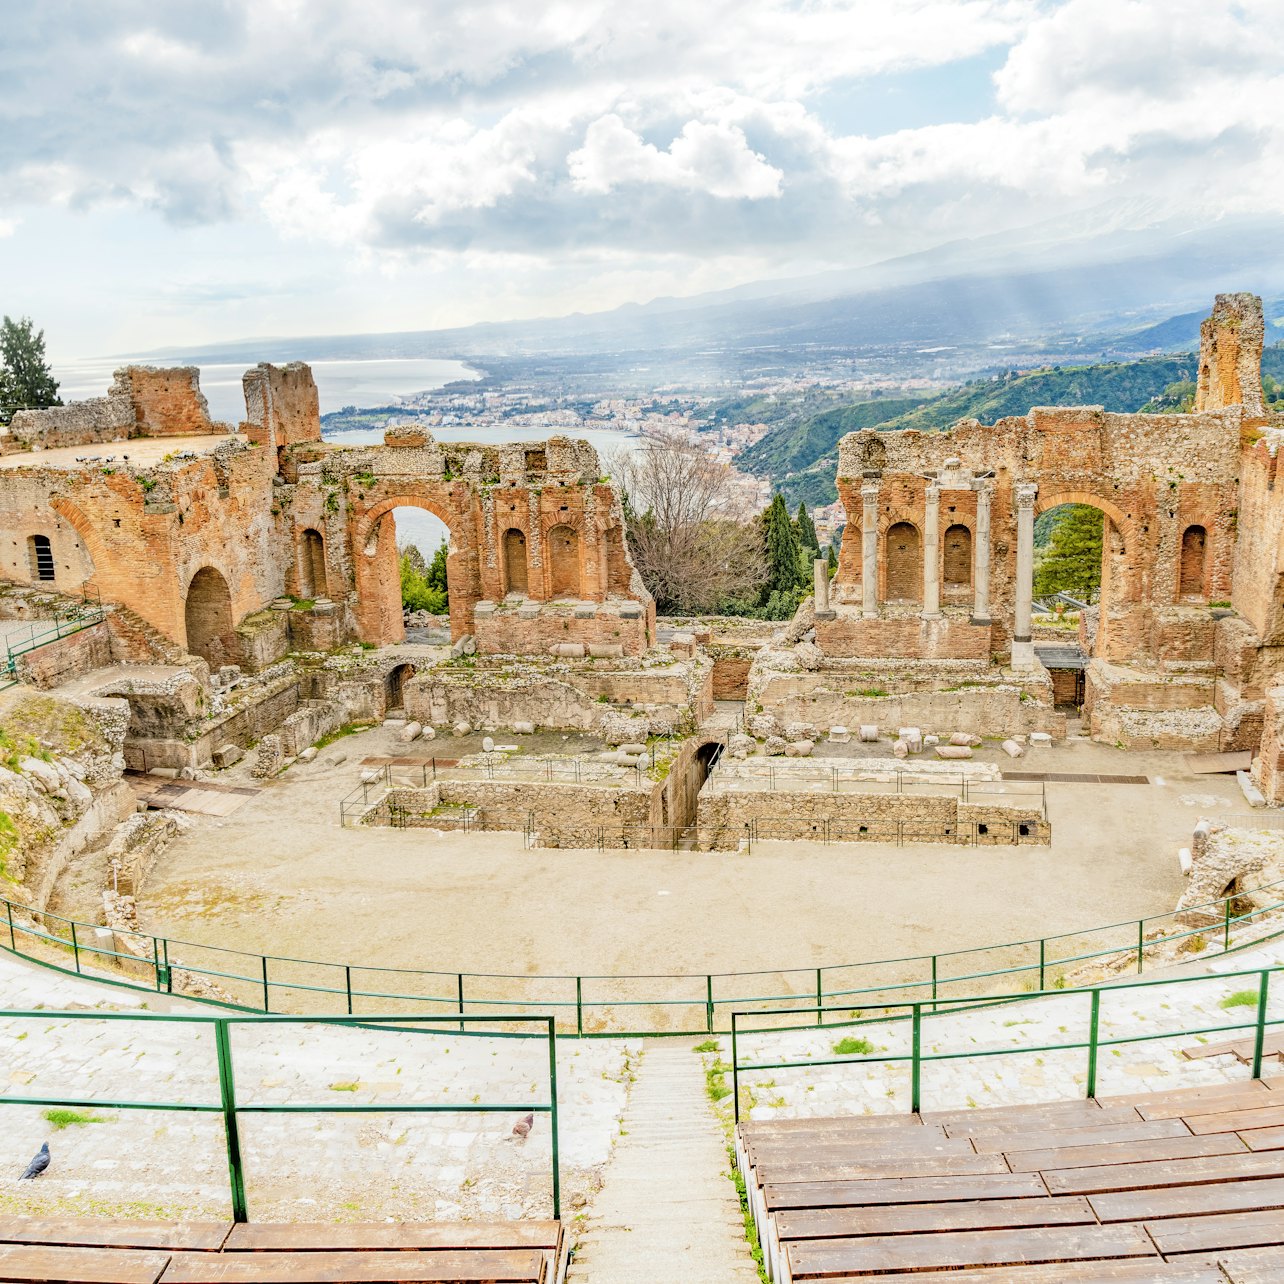 Ancient Theater of Taormina - Accommodations in Taormina